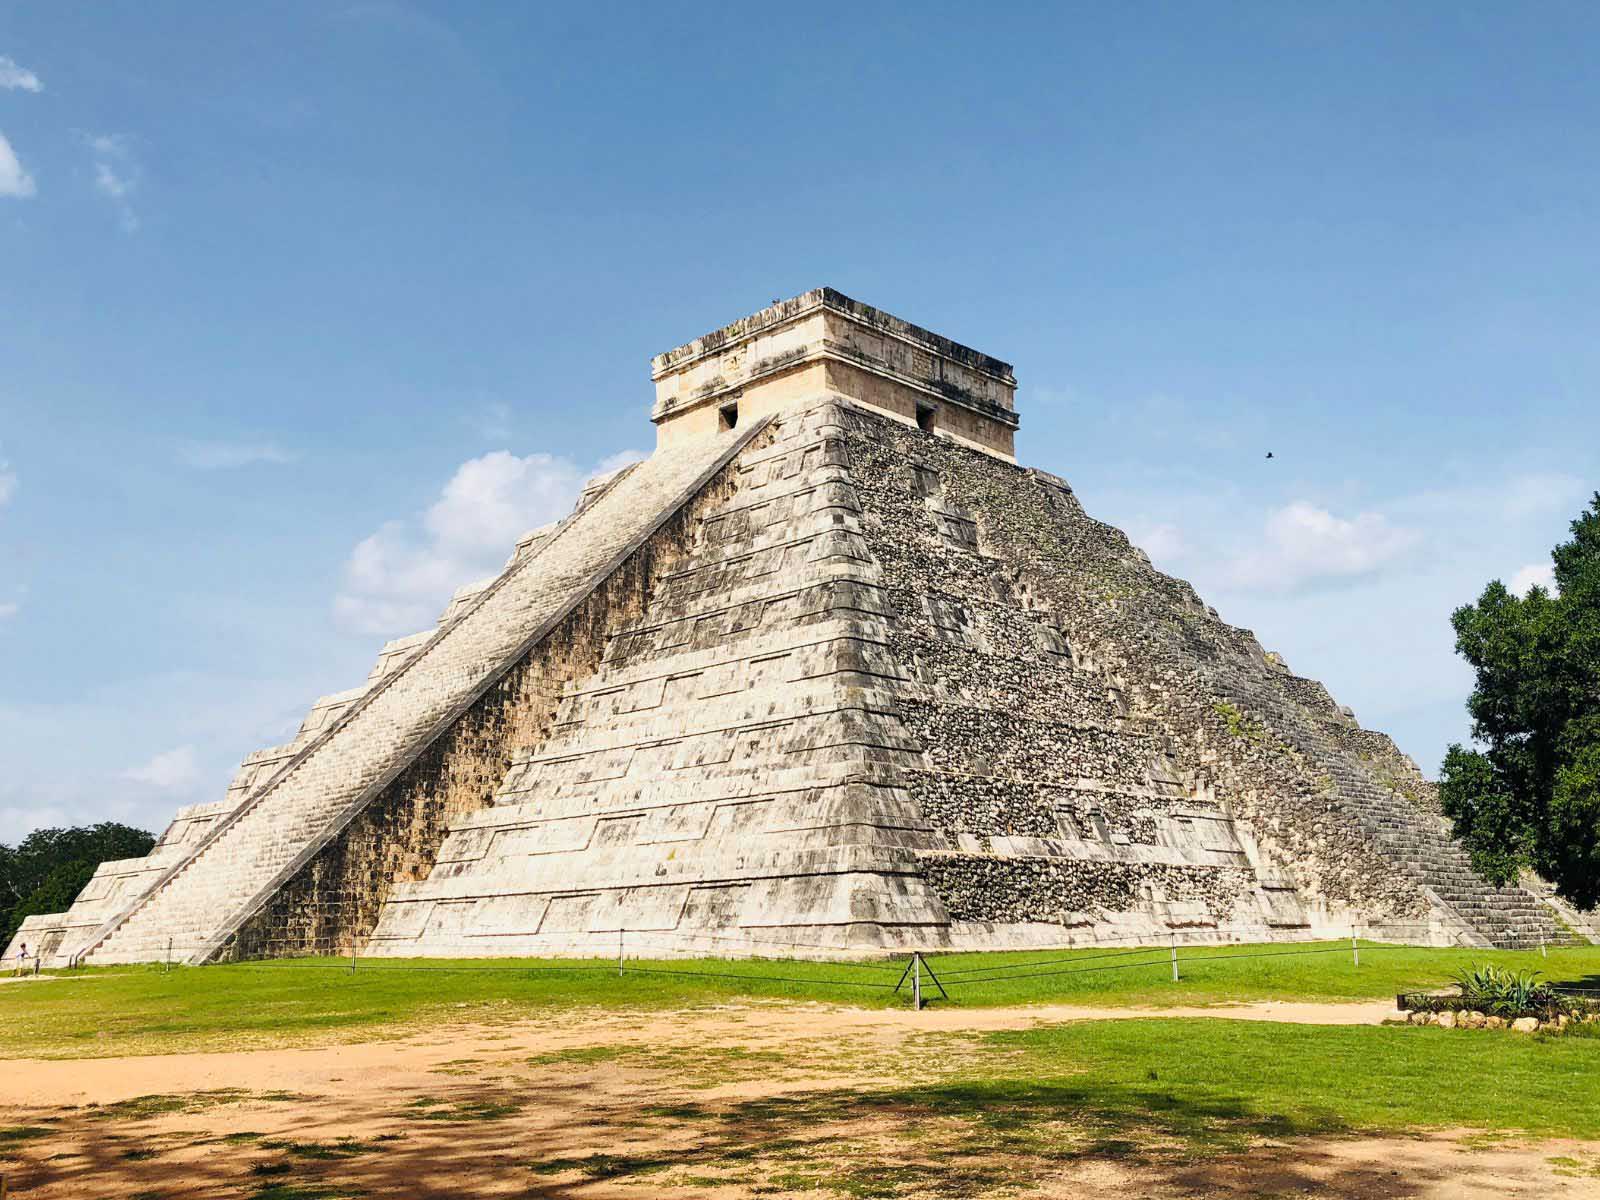 chichen itza is the most famous ancient city near the mayan ruins of tulum